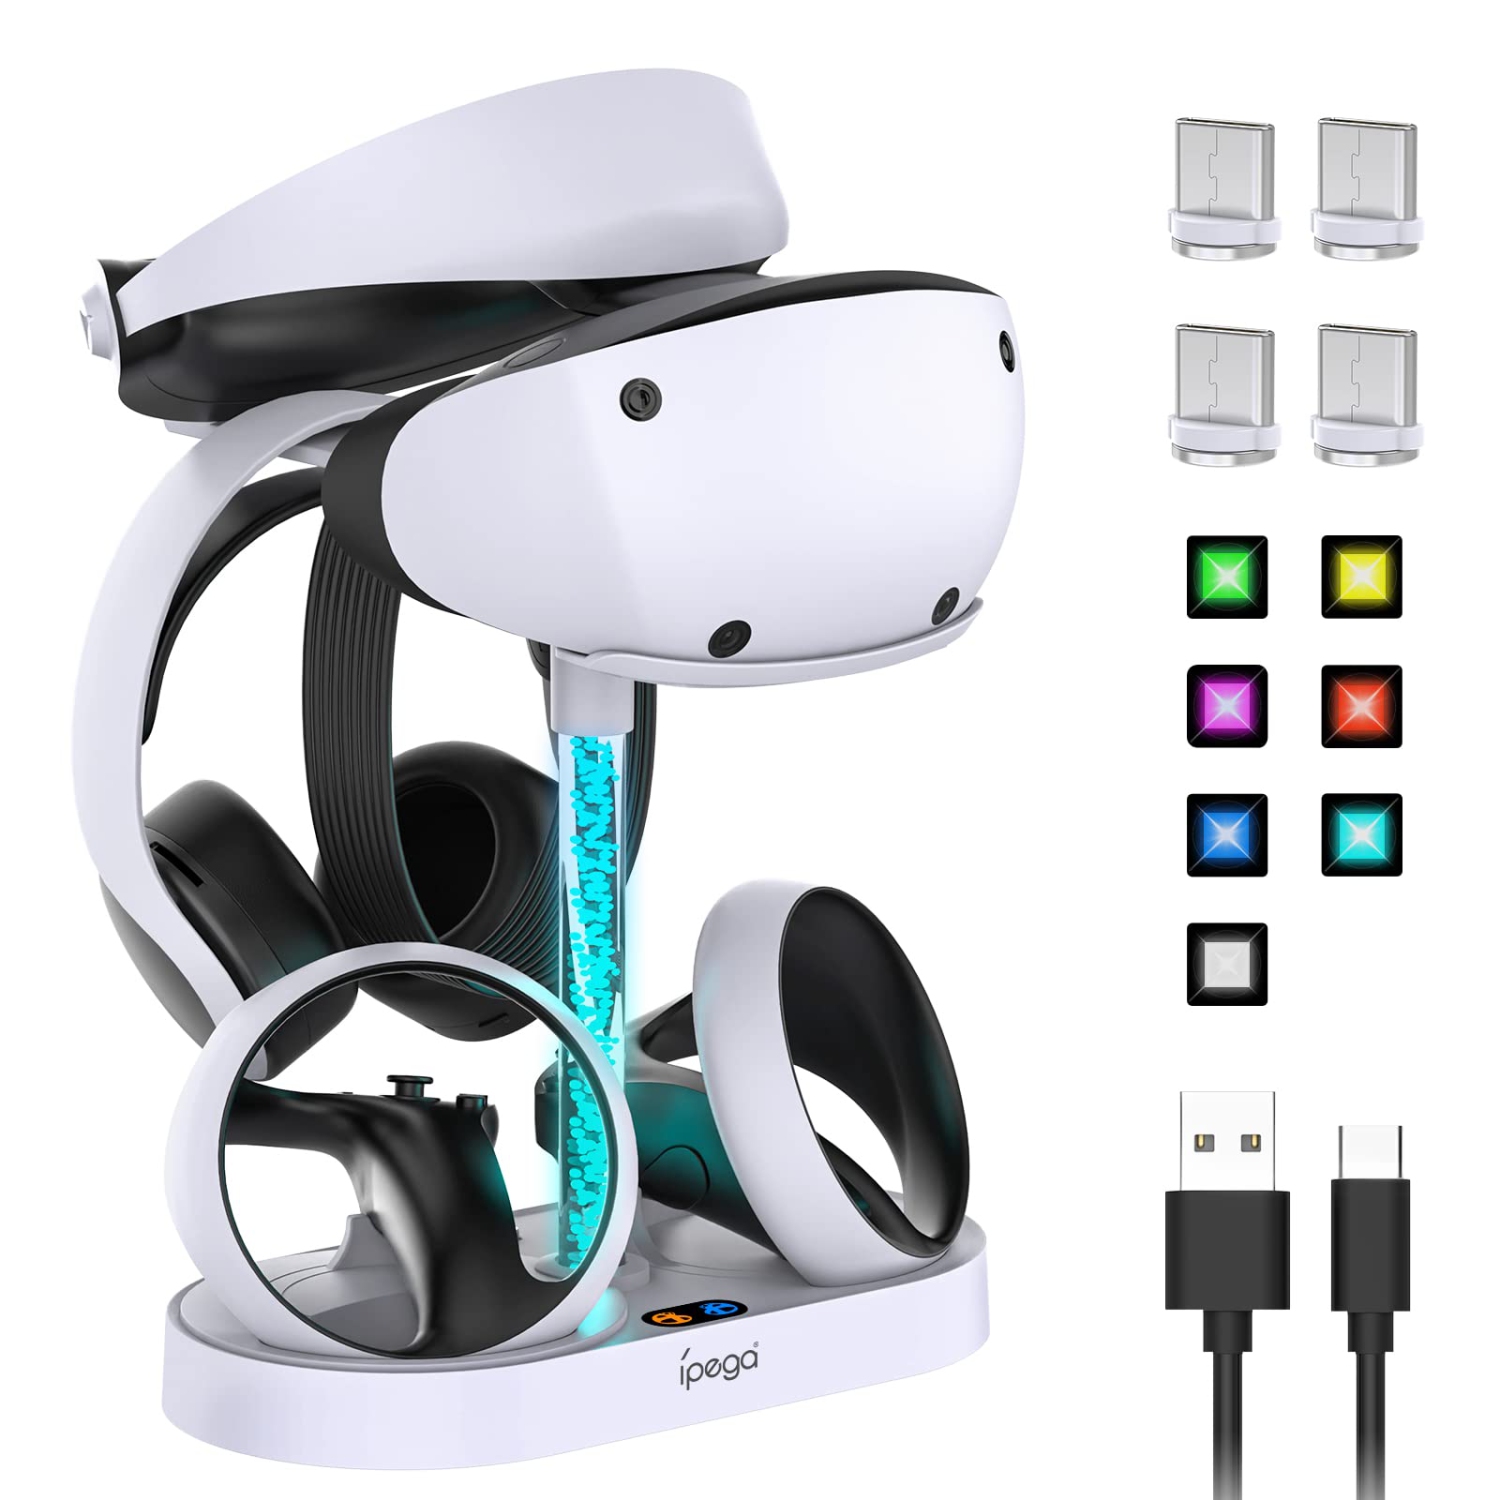 FASTSNAIL Charging Stand for Playstation VR2, Multifunction Vertical PS VR2 Headset & Sense Controllers Charge Dock Station with 10 RGB Light Modes of Memory, PS5 VR Storage Base G